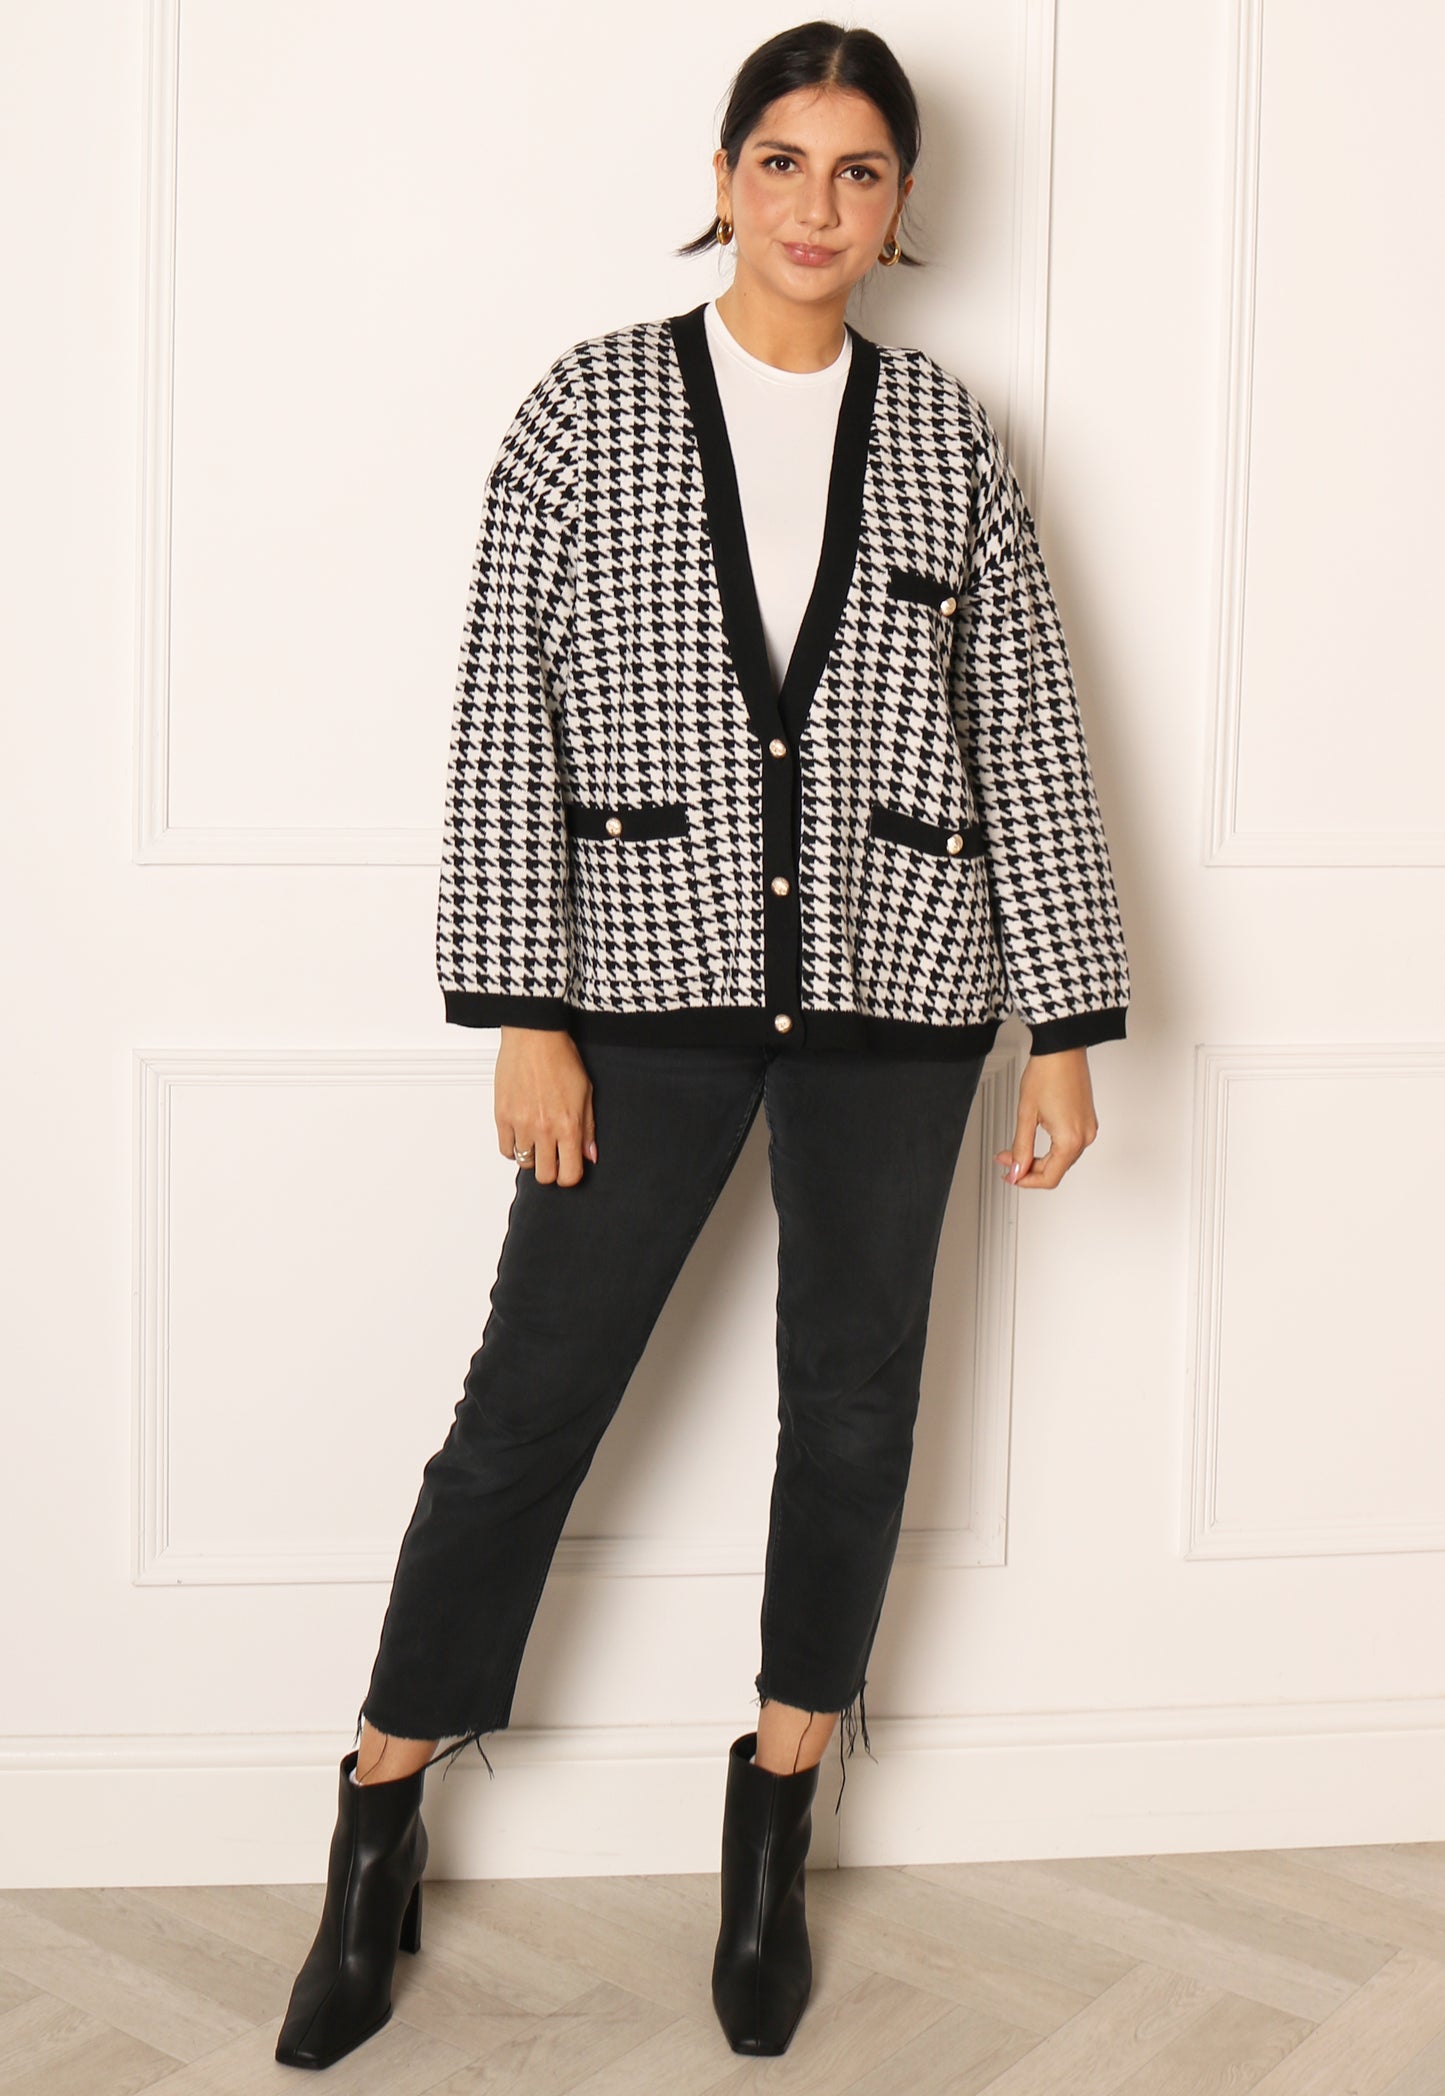 PIECES Suia Oversized Houndstooth Button Cardigan in Black & White - One Nation Clothing